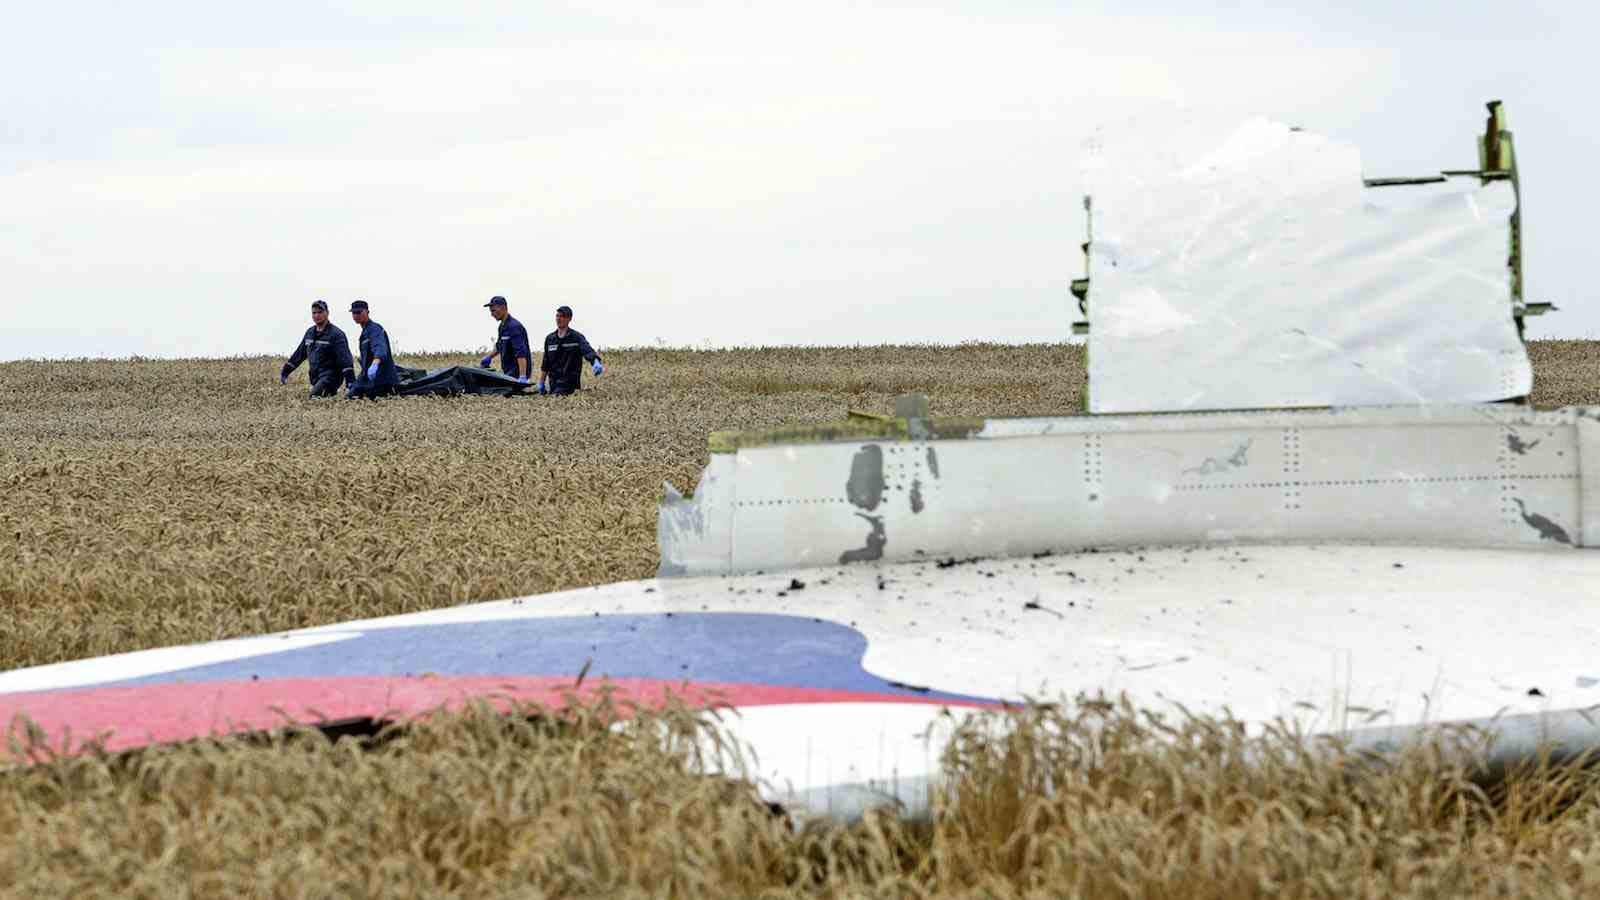 ‘Many’ human remains found at MH17 crash site – Dutch